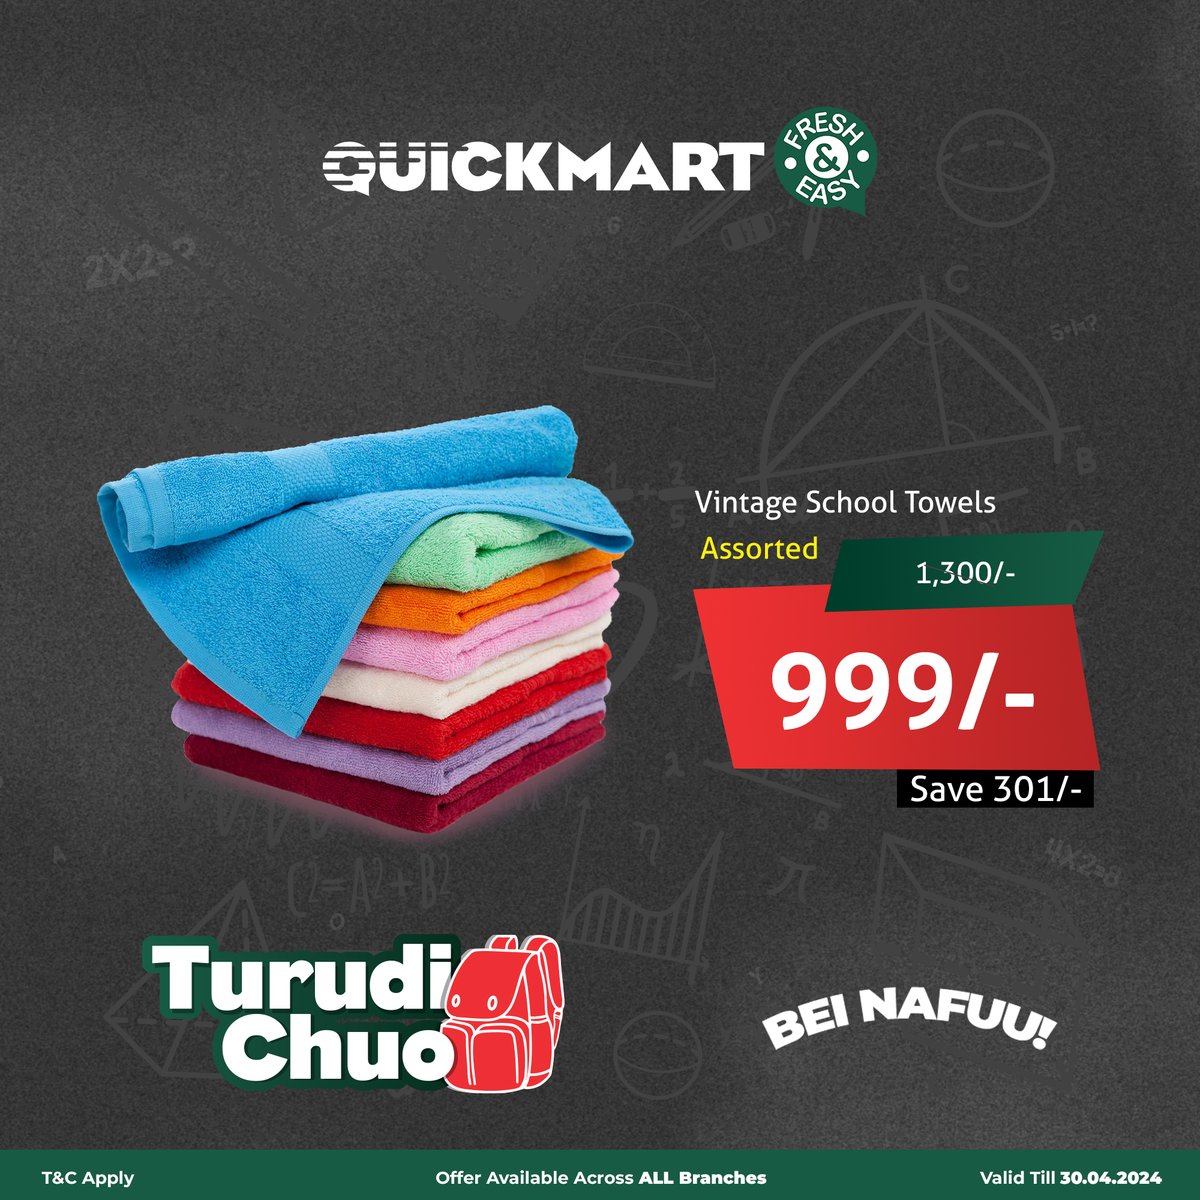 Start the school year fresh with our vibrant towels! Available at your home for Fresh & Easy. *Offer validity as indicated at the bottom right of the image. #BeiNafuu #FreshAndEasy #PamojaNawe